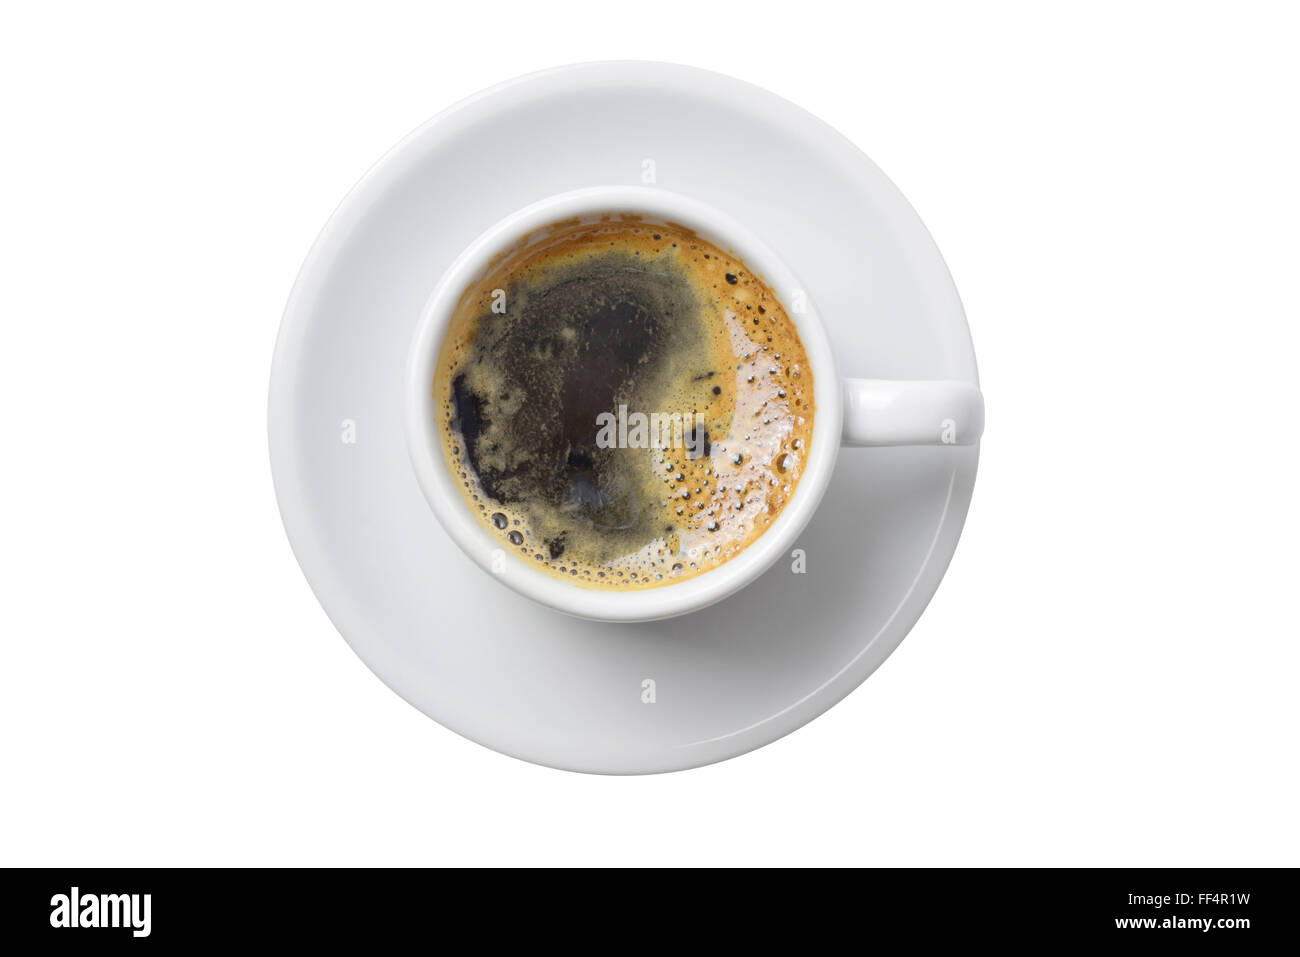 Single cup of coffee top view with plate isolated on empty white background. Clipping path included. Stock Photo